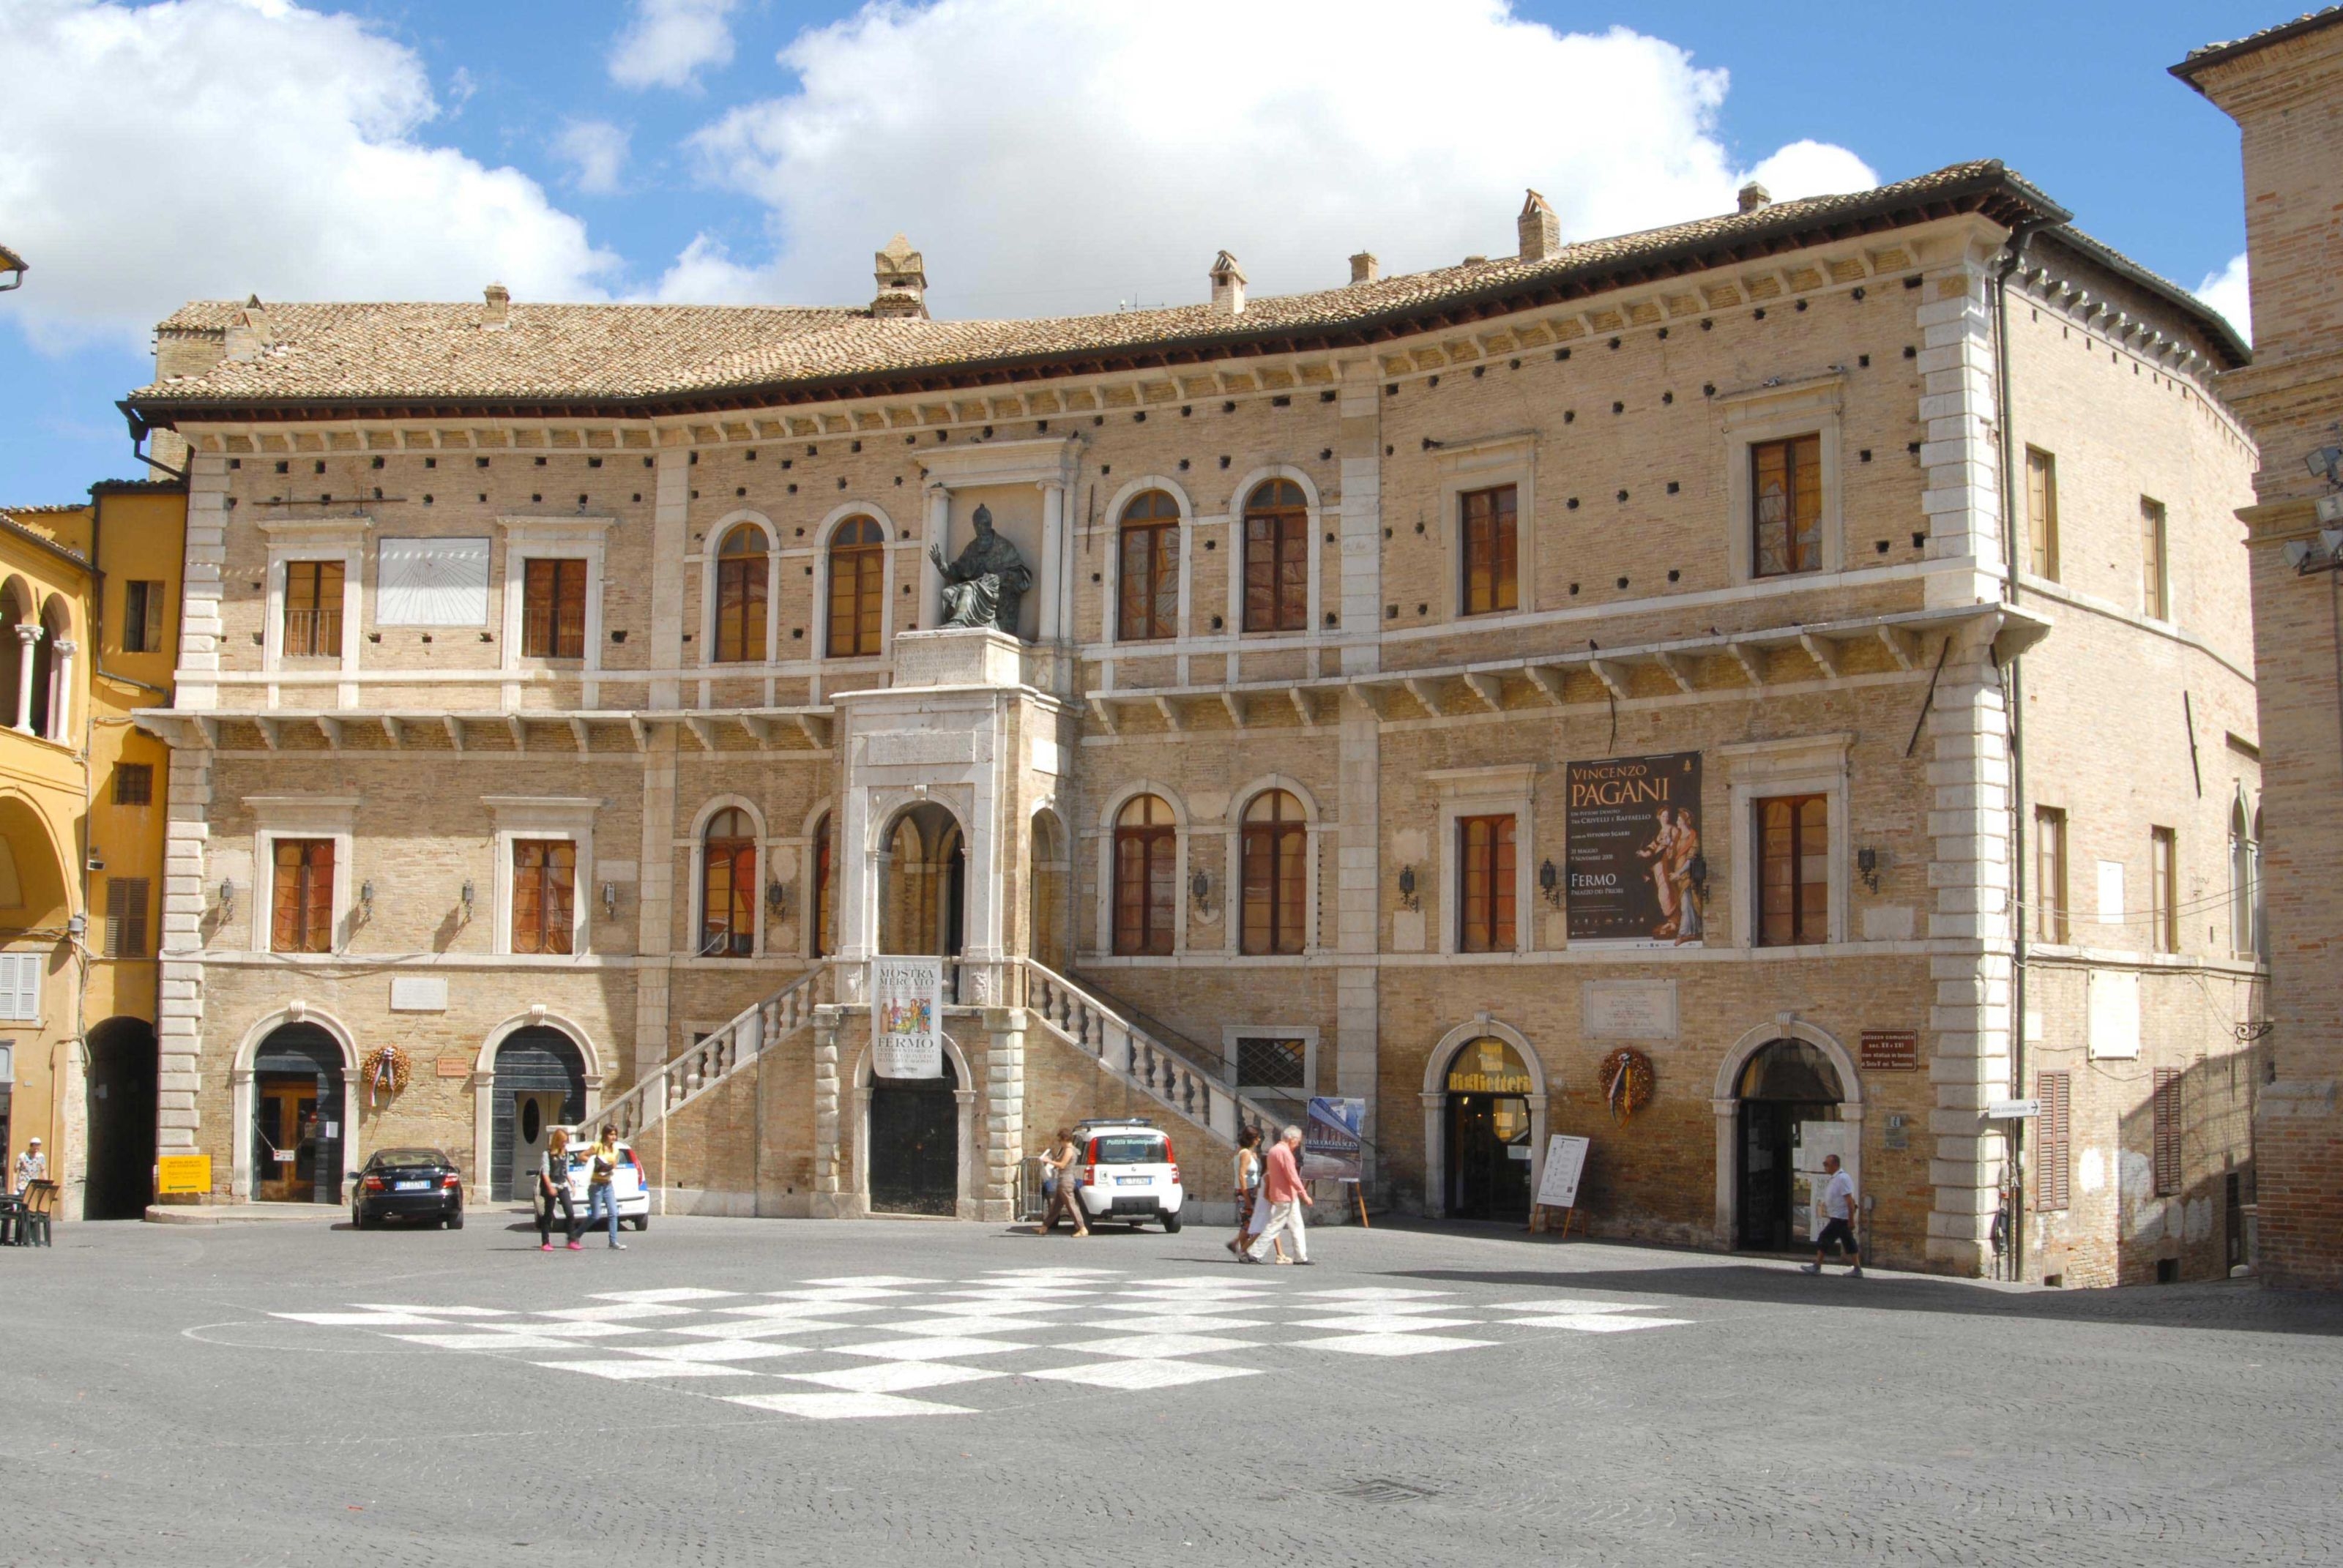 Archaeological Museum of Fermo